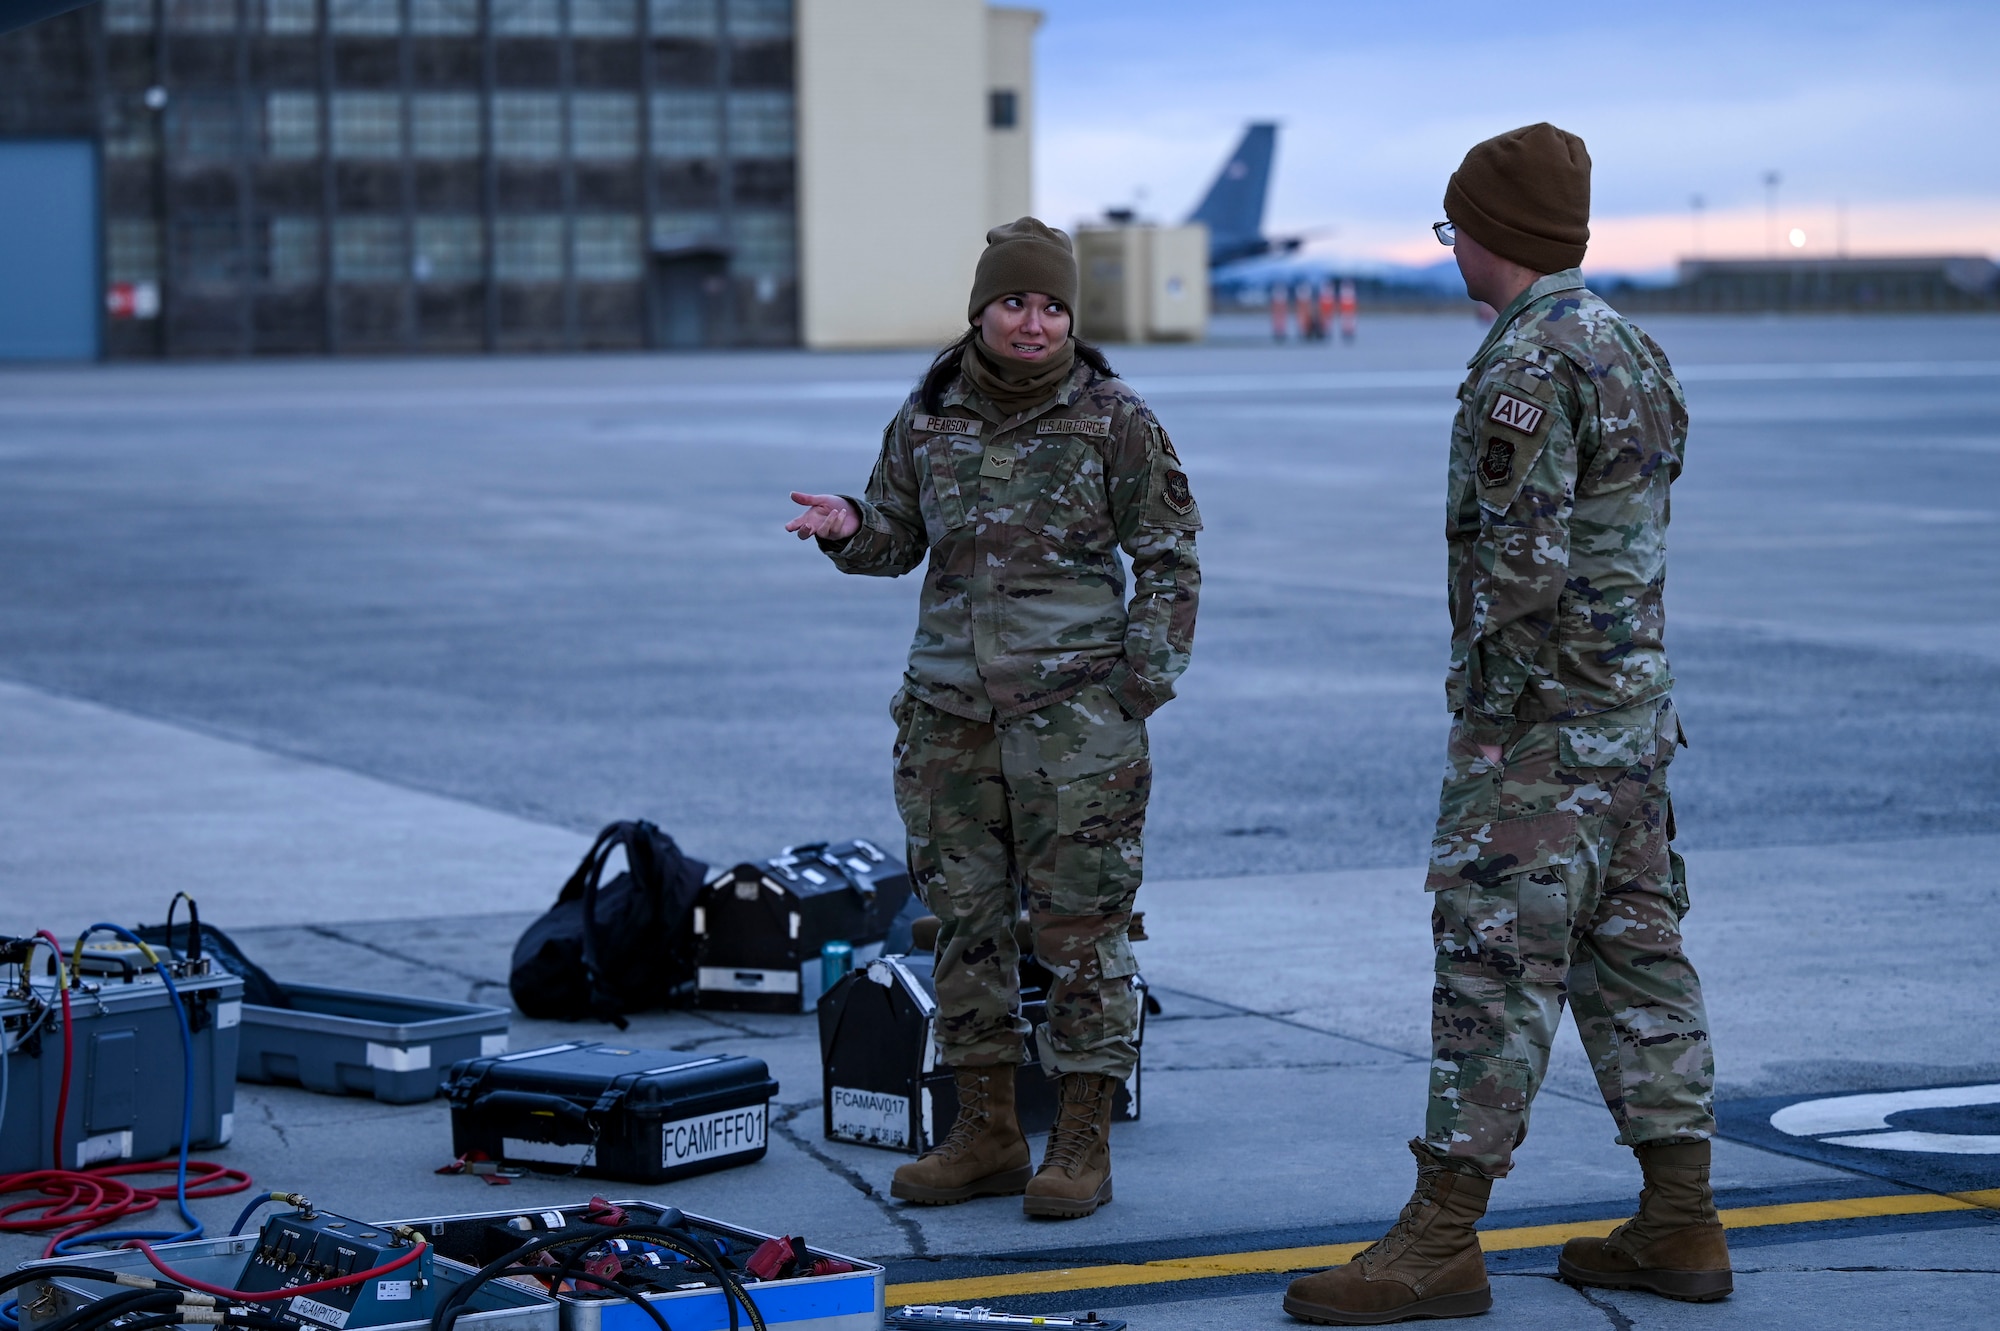 Airmen talk in front of an aircraft on the flightline.